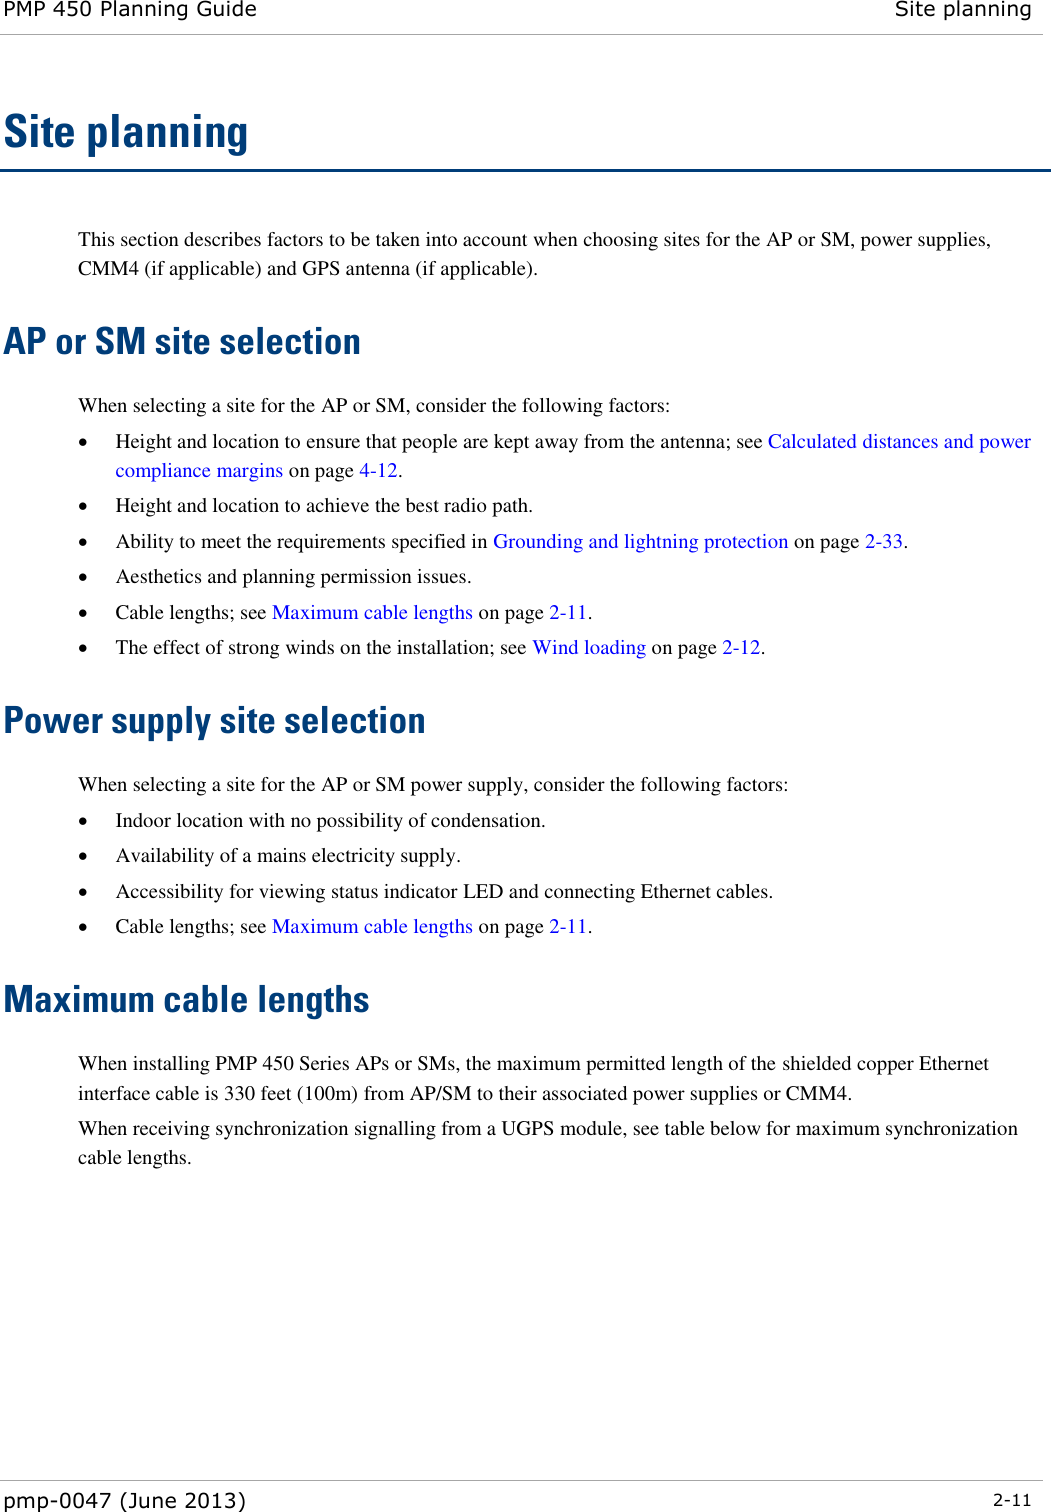 PMP 450 Planning Guide Site planning  pmp-0047 (June 2013)  2-11  Site planning This section describes factors to be taken into account when choosing sites for the AP or SM, power supplies, CMM4 (if applicable) and GPS antenna (if applicable). AP or SM site selection  When selecting a site for the AP or SM, consider the following factors:  Height and location to ensure that people are kept away from the antenna; see Calculated distances and power compliance margins on page 4-12.  Height and location to achieve the best radio path.  Ability to meet the requirements specified in Grounding and lightning protection on page 2-33.  Aesthetics and planning permission issues.  Cable lengths; see Maximum cable lengths on page 2-11.  The effect of strong winds on the installation; see Wind loading on page 2-12. Power supply site selection  When selecting a site for the AP or SM power supply, consider the following factors:  Indoor location with no possibility of condensation.  Availability of a mains electricity supply.  Accessibility for viewing status indicator LED and connecting Ethernet cables.  Cable lengths; see Maximum cable lengths on page 2-11. Maximum cable lengths When installing PMP 450 Series APs or SMs, the maximum permitted length of the shielded copper Ethernet interface cable is 330 feet (100m) from AP/SM to their associated power supplies or CMM4.   When receiving synchronization signalling from a UGPS module, see table below for maximum synchronization cable lengths. 